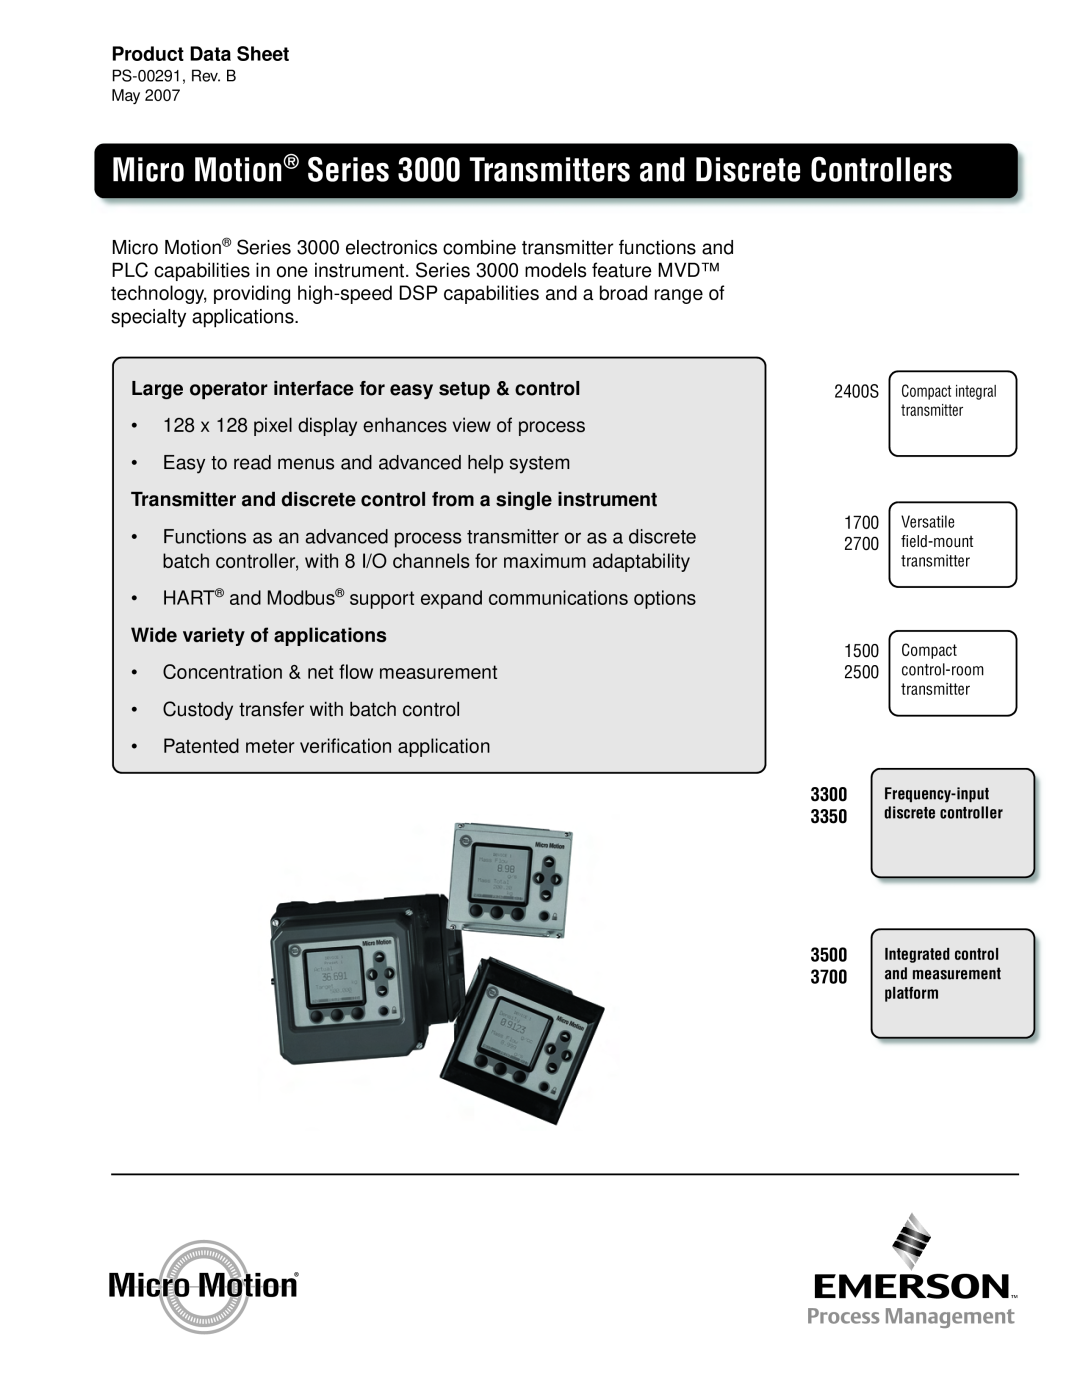 Emerson Series 3000 manual Product Data Sheet, Large operator interface for easy setup & control 